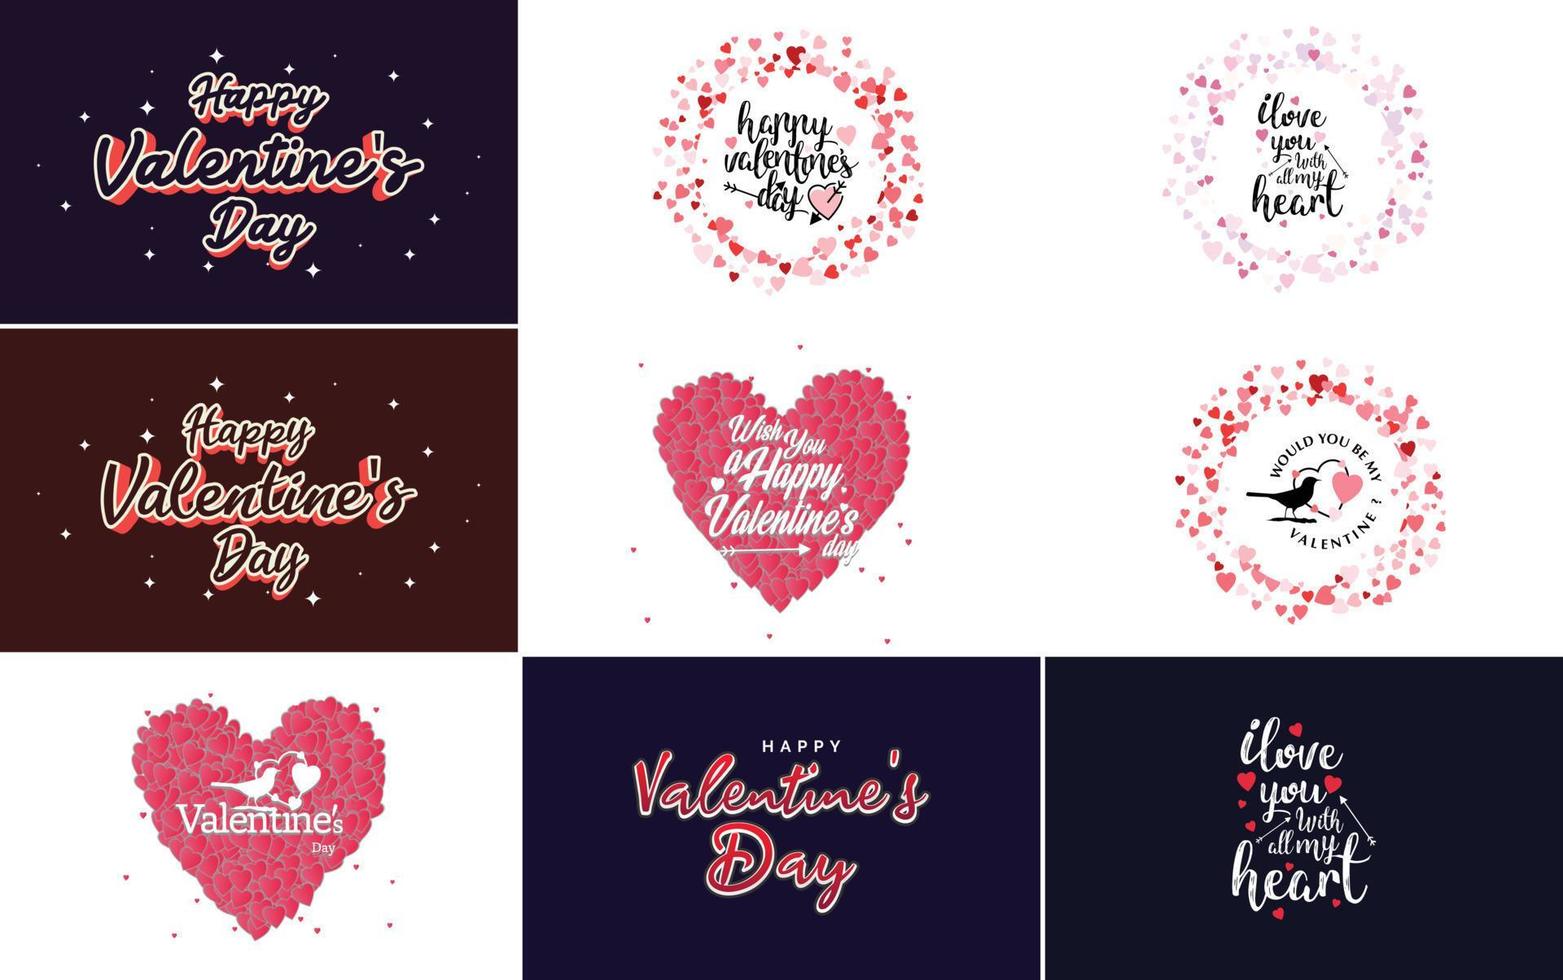 Valentine's word art design with heart-shaped backgrounds vector